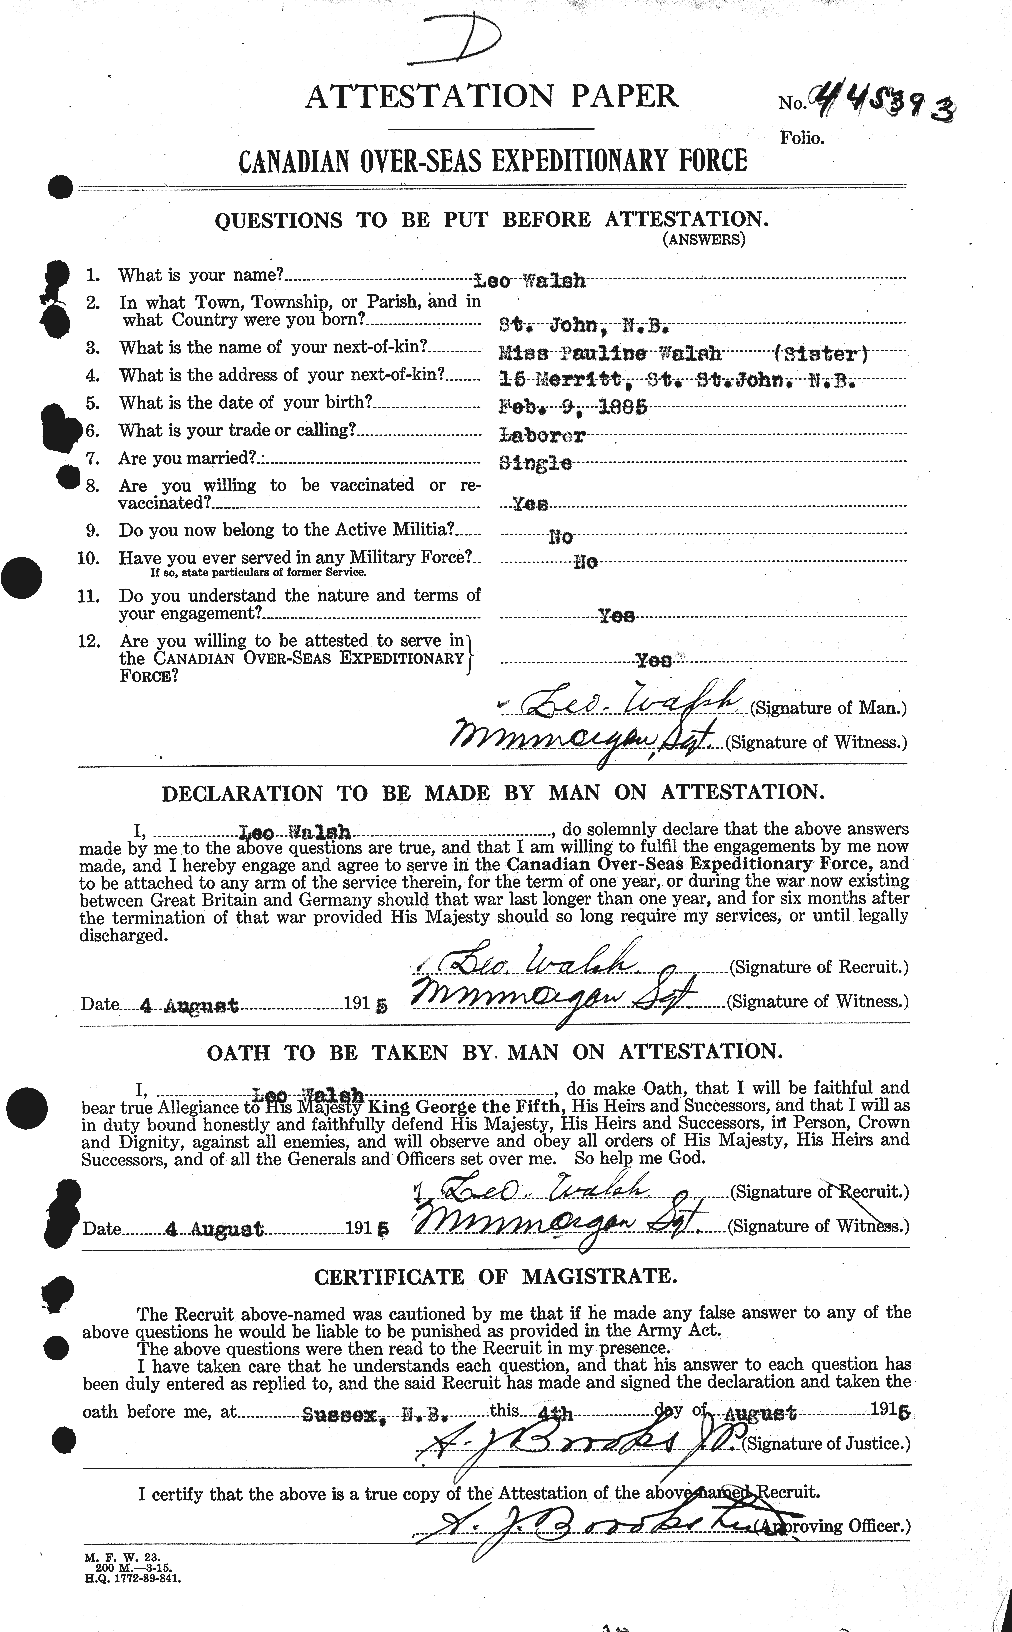 Personnel Records of the First World War - CEF 653410a